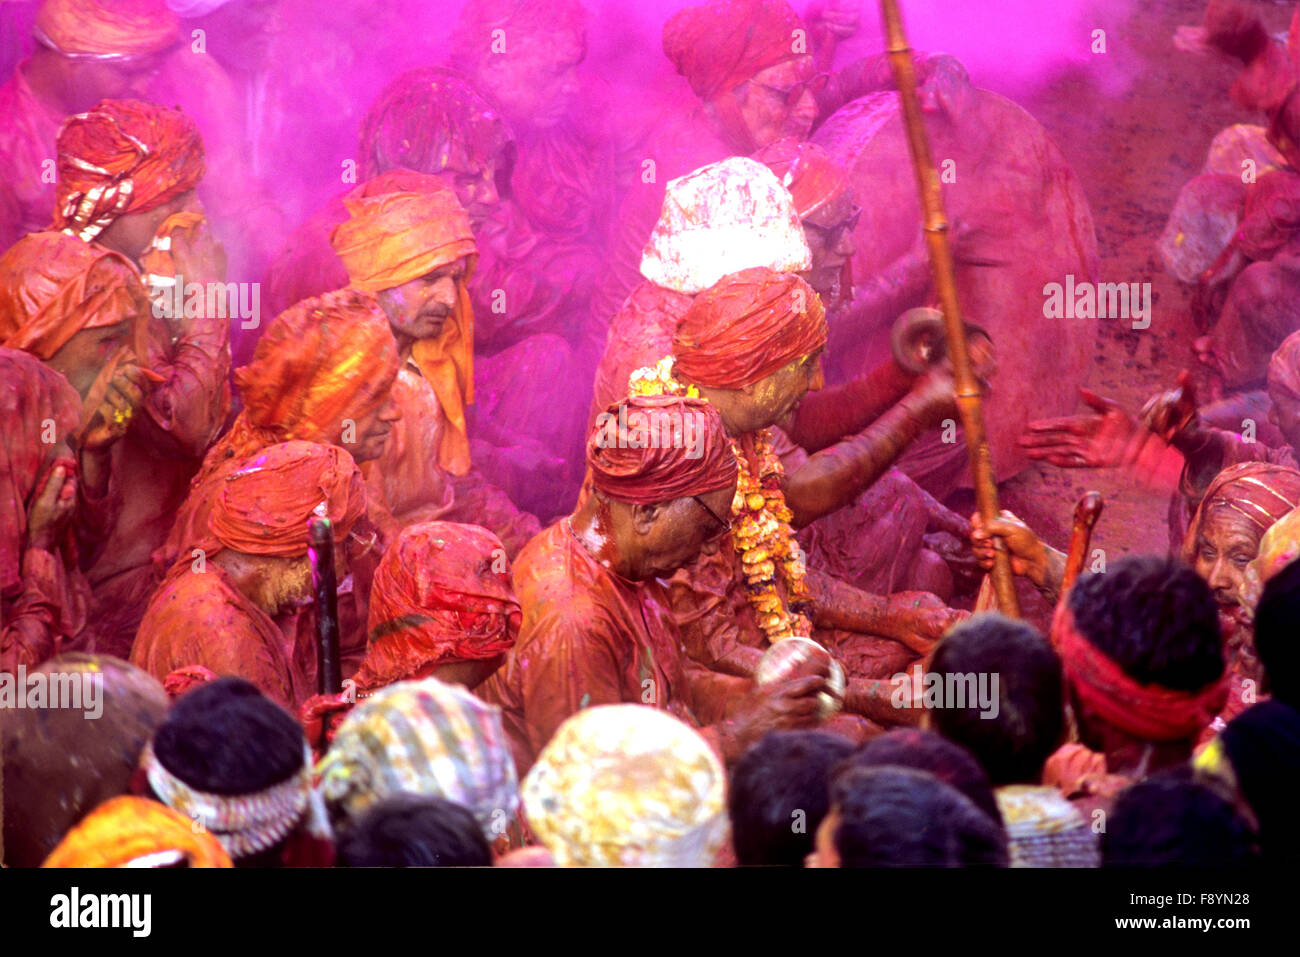 People daubed in colored water, singing a hymn moving towards a temple during “Holi Festival” at, Mathura, Uttar Pradesh, India. Stock Photo